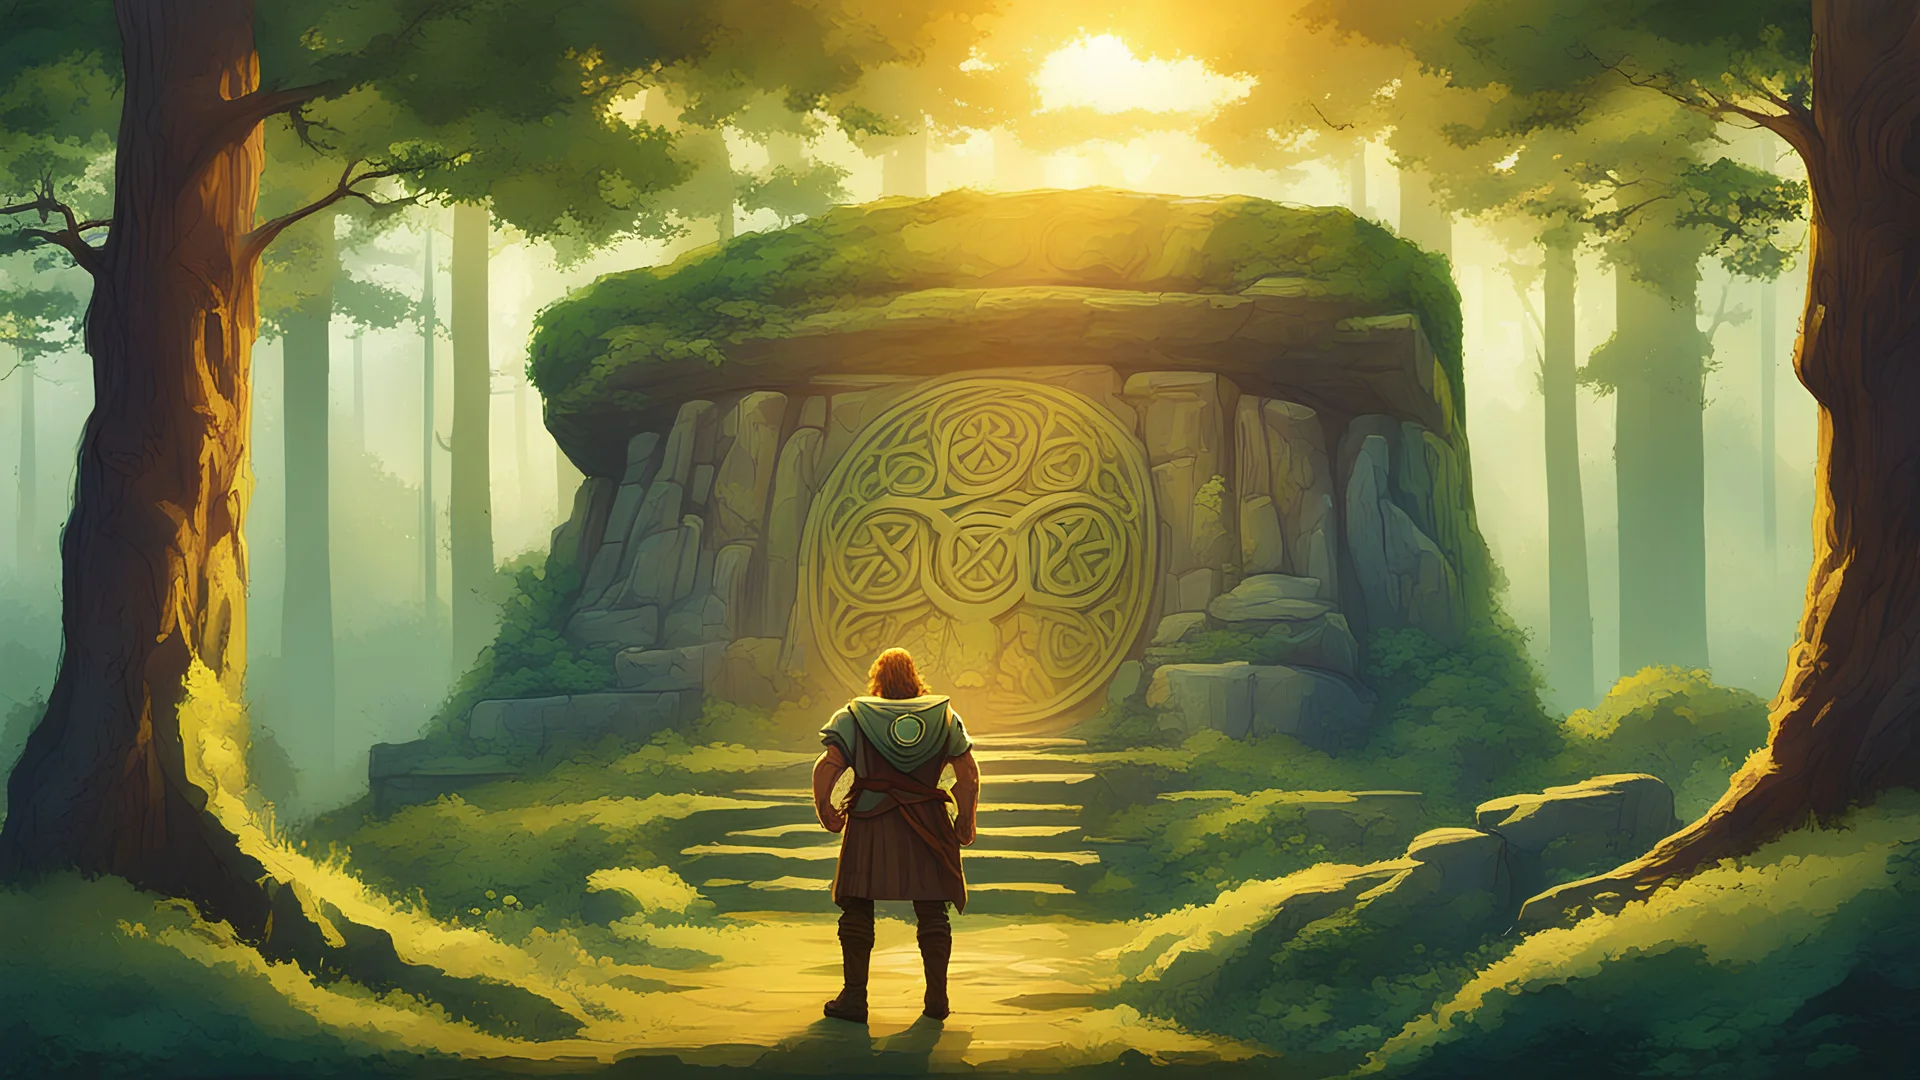 Retro video game showcases a lush forest bathed in golden sunlight, with a majestic dolmen standing amidst vibrant greenery. Hero, clad in Celtic attire, stands ready for adventure. At the center of the poster, our hero stands poised for adventure, clad in traditional Celtic attire and wielding a sword adorned with Gaelic motifs. Their gaze is resolute, reflecting determination in the face of the unknown. Beneath, silhouettes of mystical creatures dance